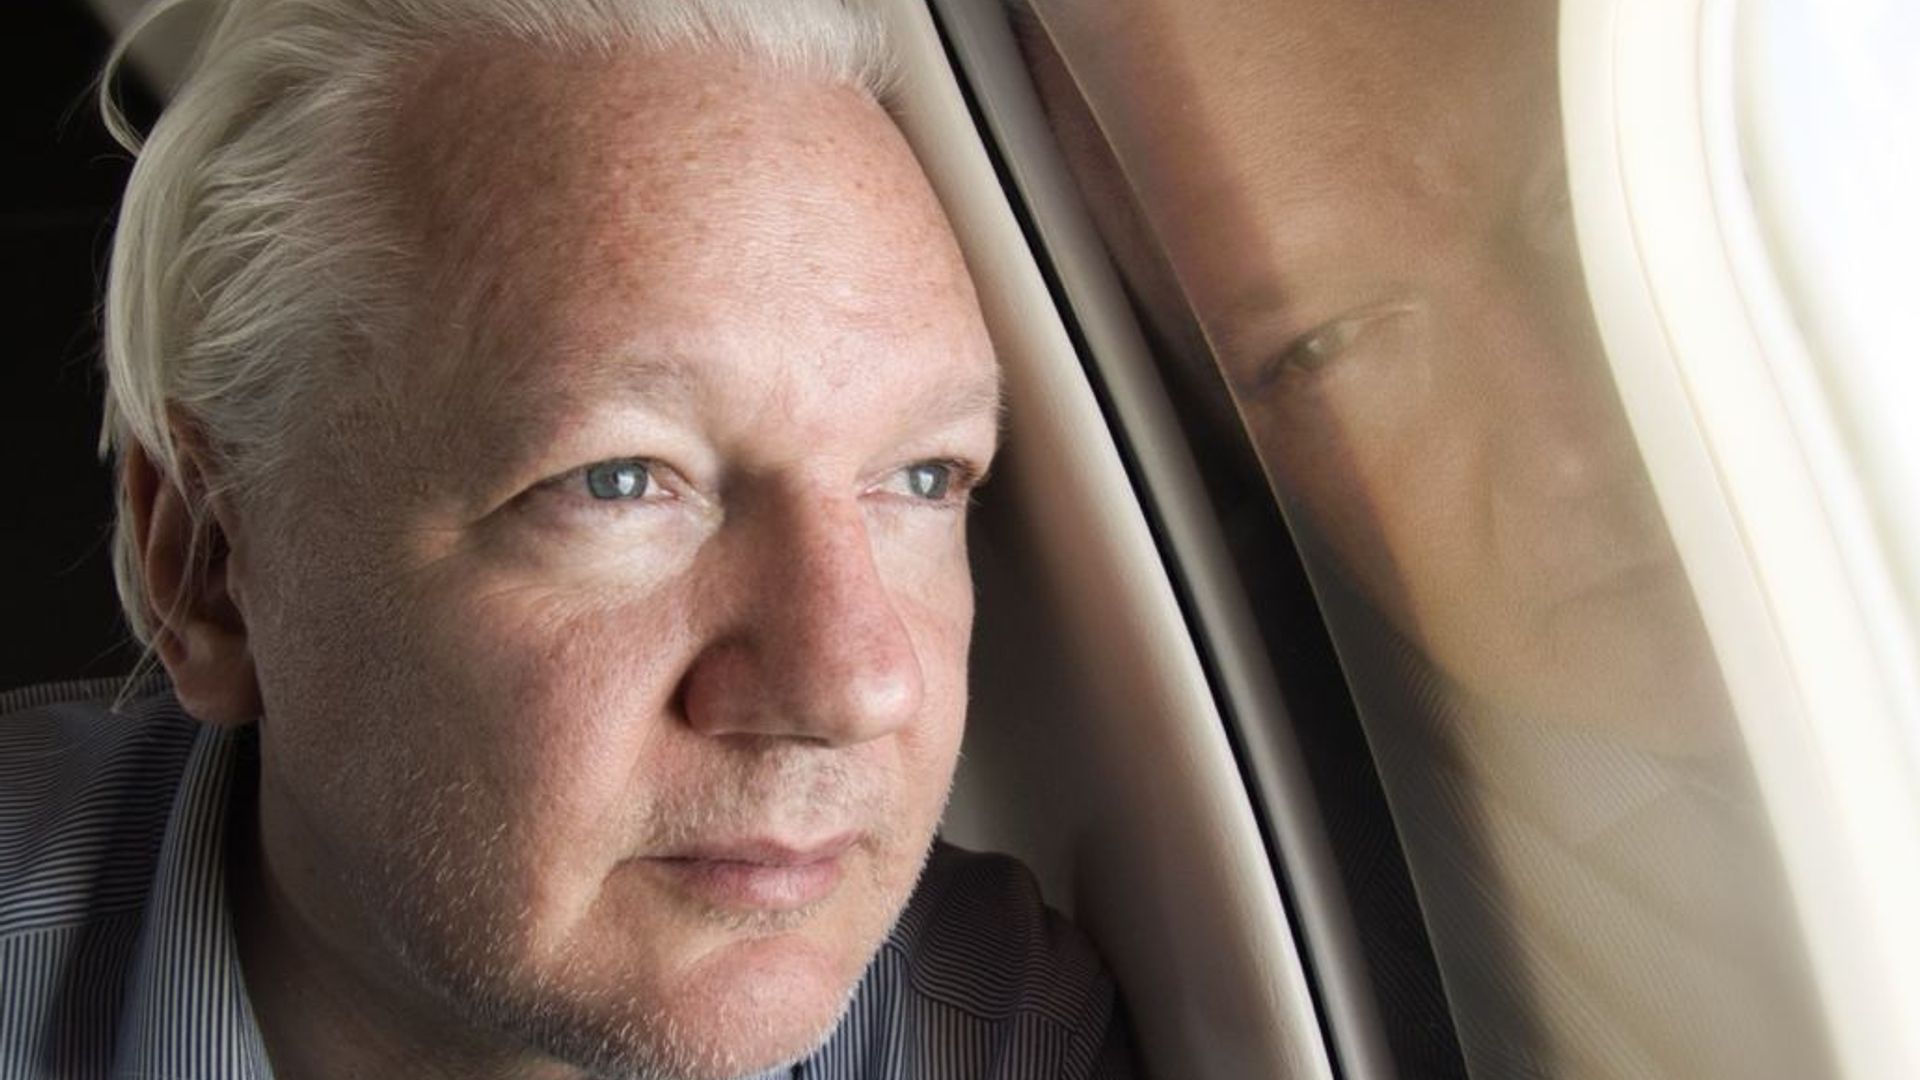 WikiLeaks founder Julian Assange is expected to walk free after he pleads guilty to violating the U.S. Espionage Act.